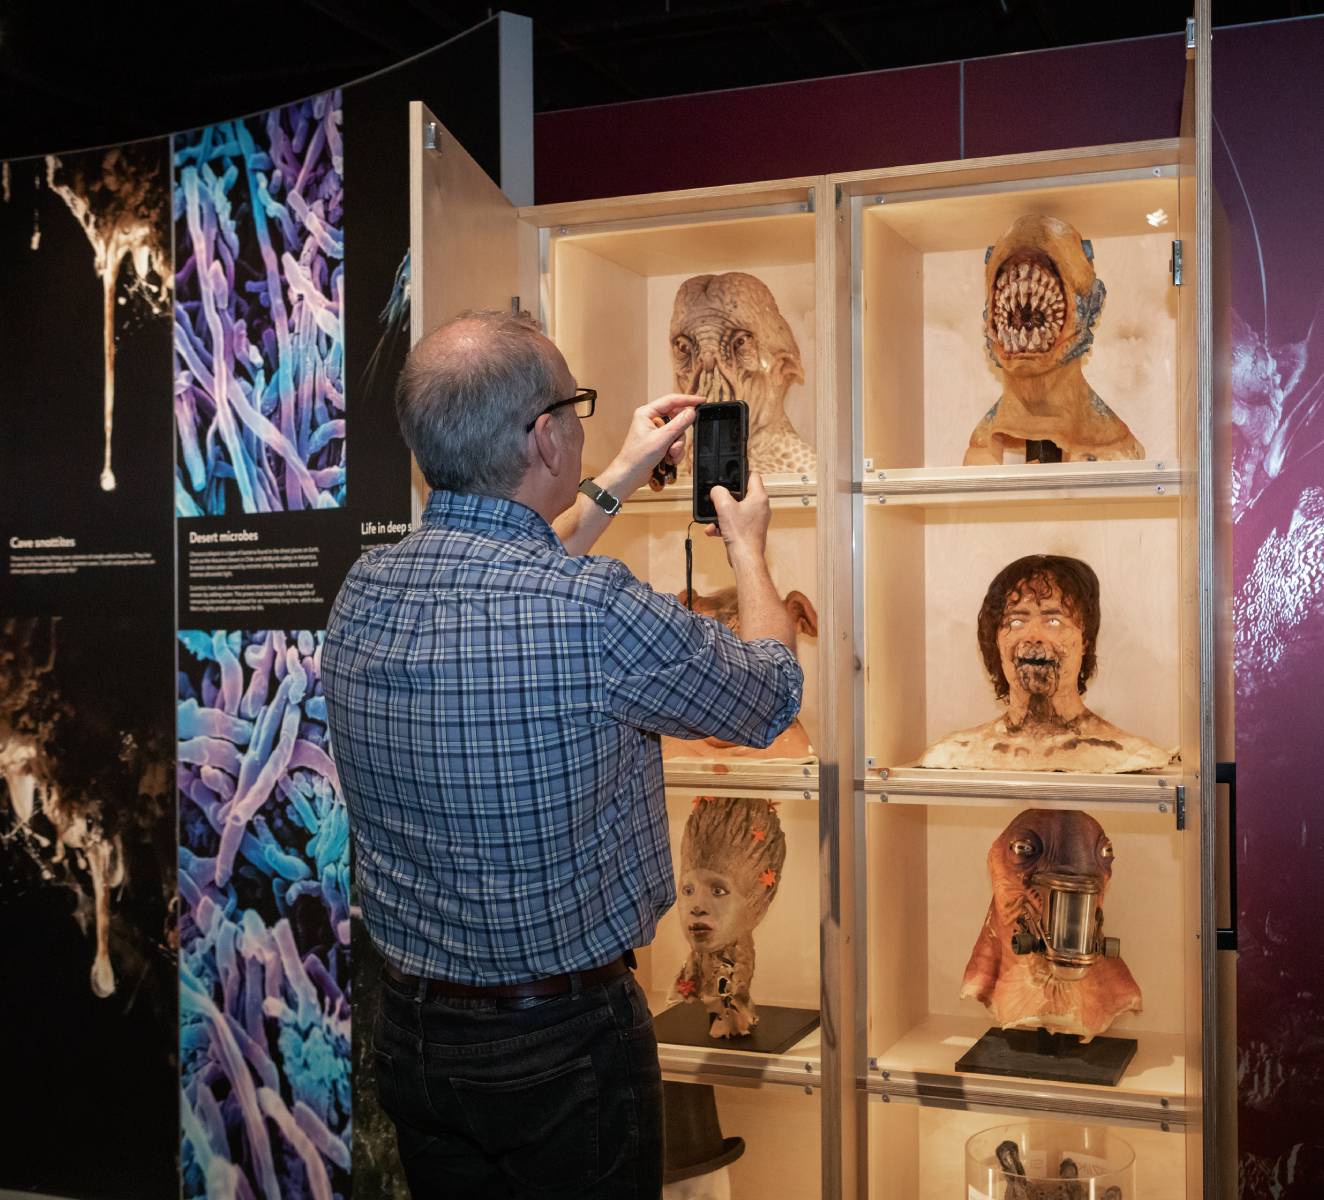 A man takes a photo on his phone of alien heads and props from the television series, Doctor Who.